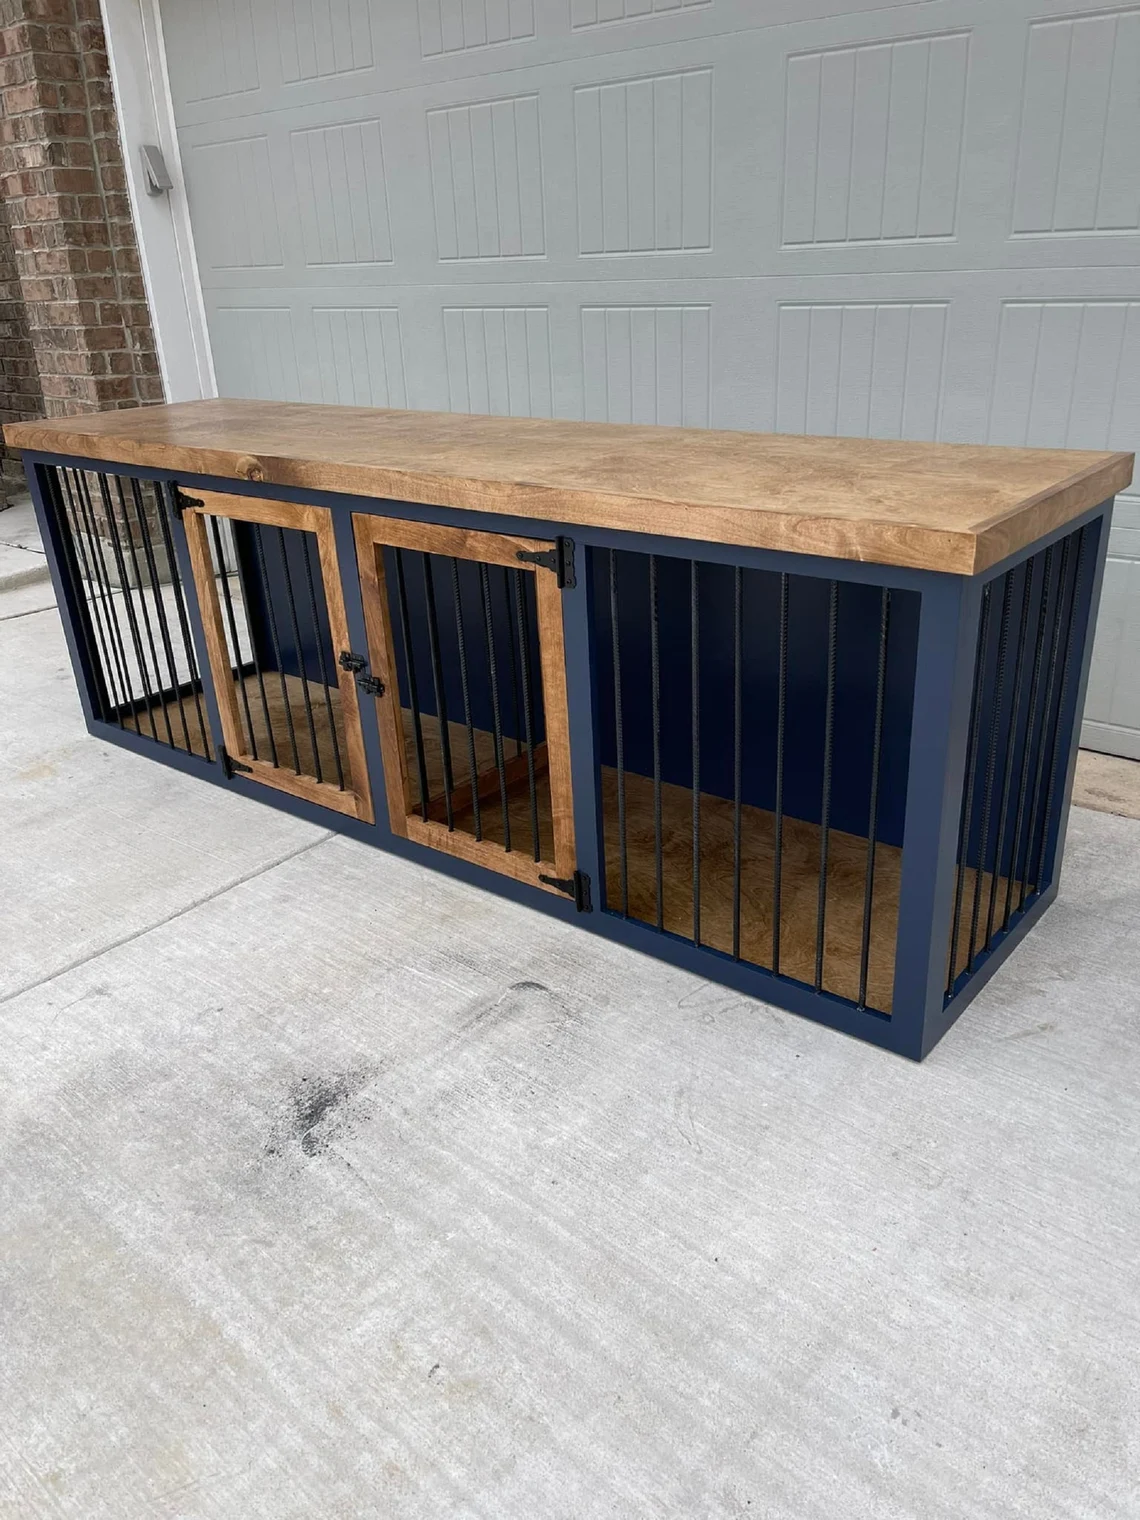 DIY WOODEN DOUBLE DOG CRATE